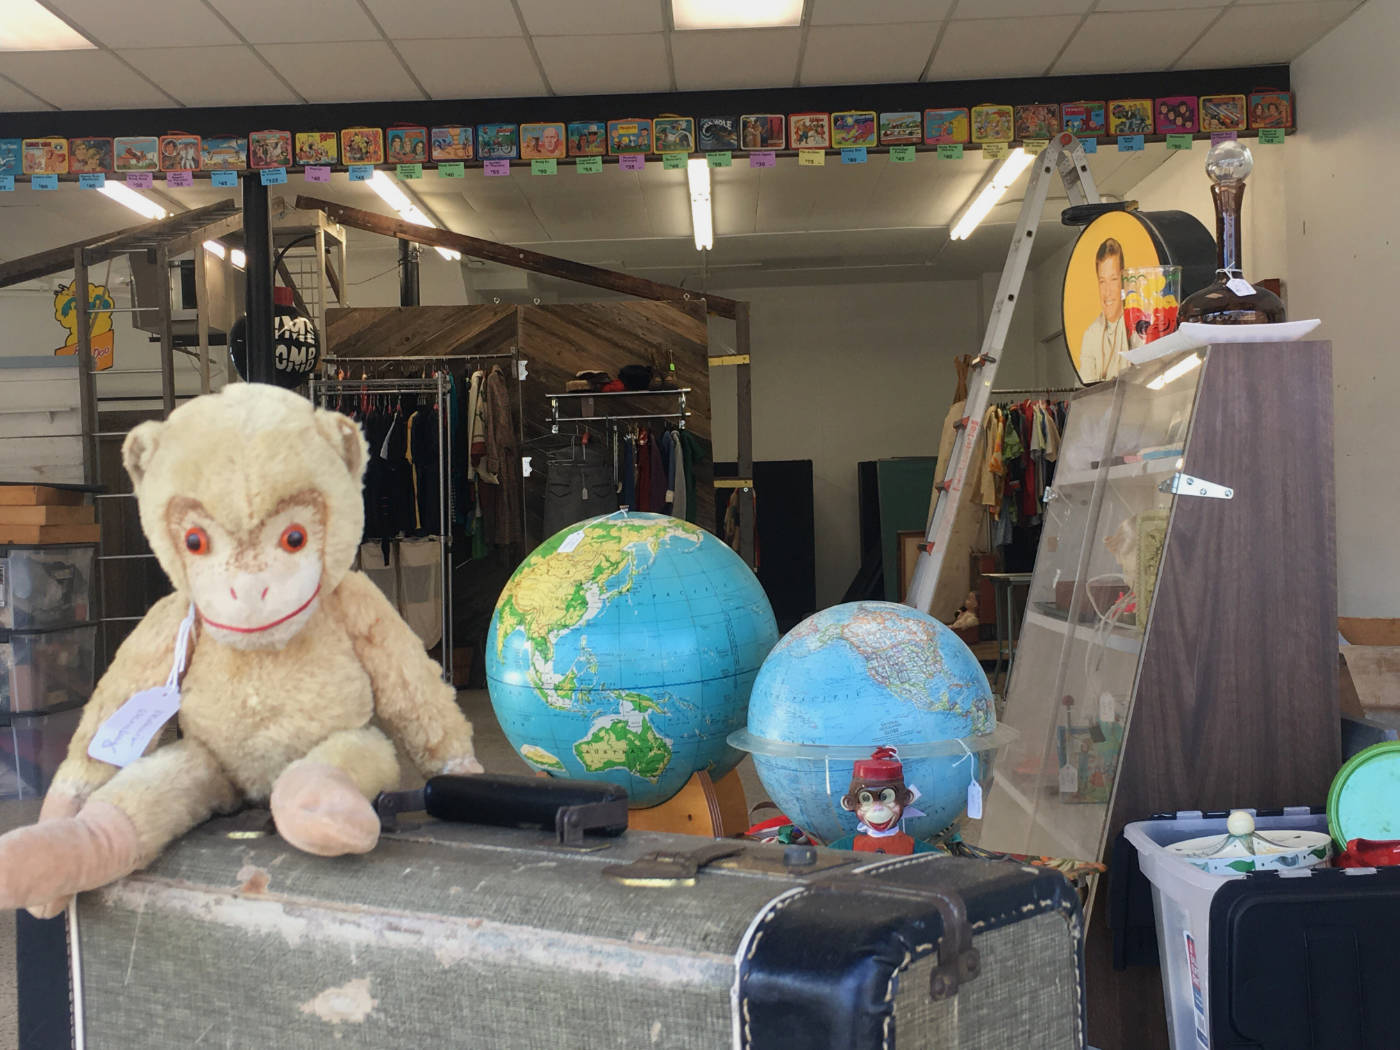 store window with globes stuffed monkey on an old suitcase surrounded by small knickknacks with racks of clothing in the background